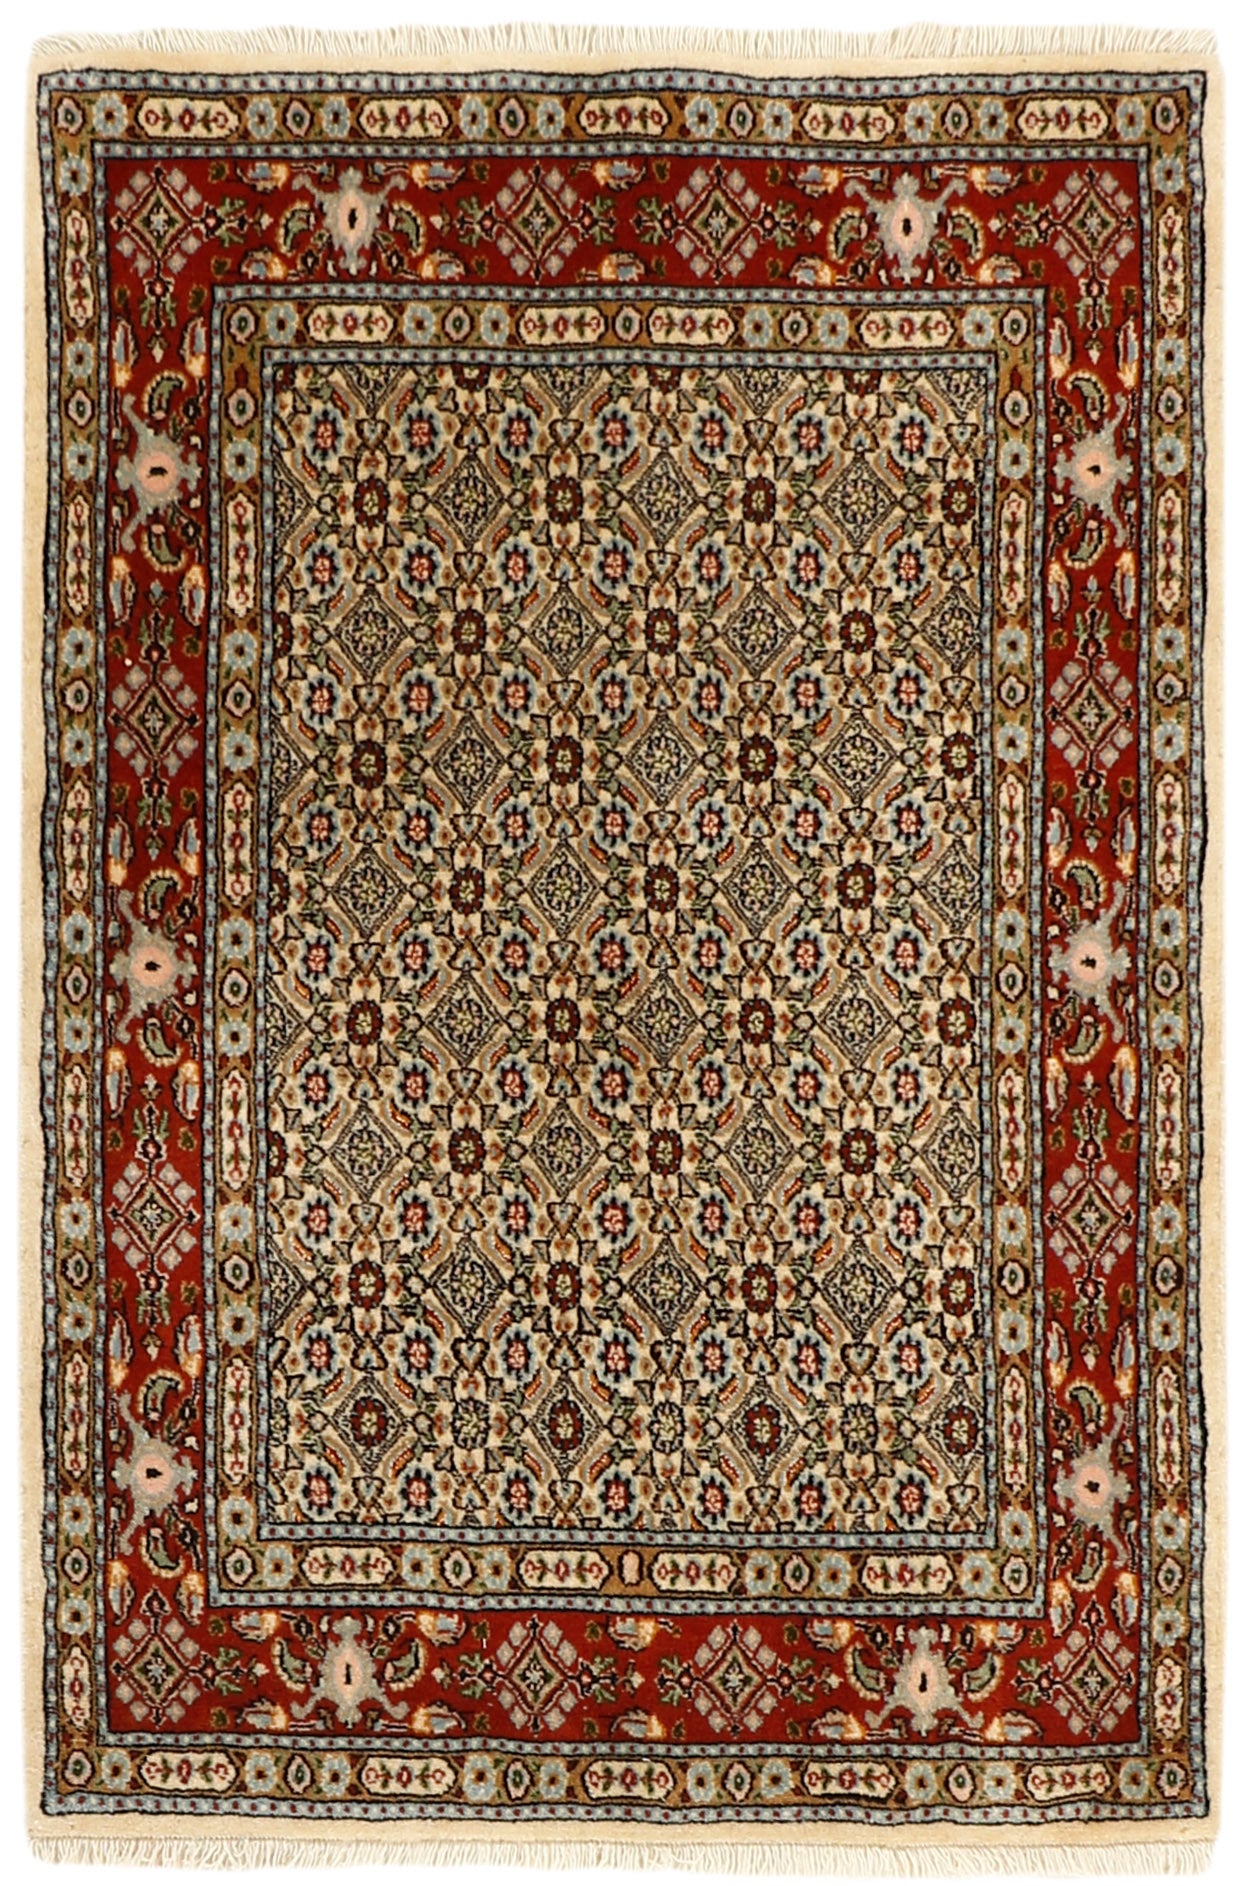 authentic persian rug with traditional floral pattern in beige